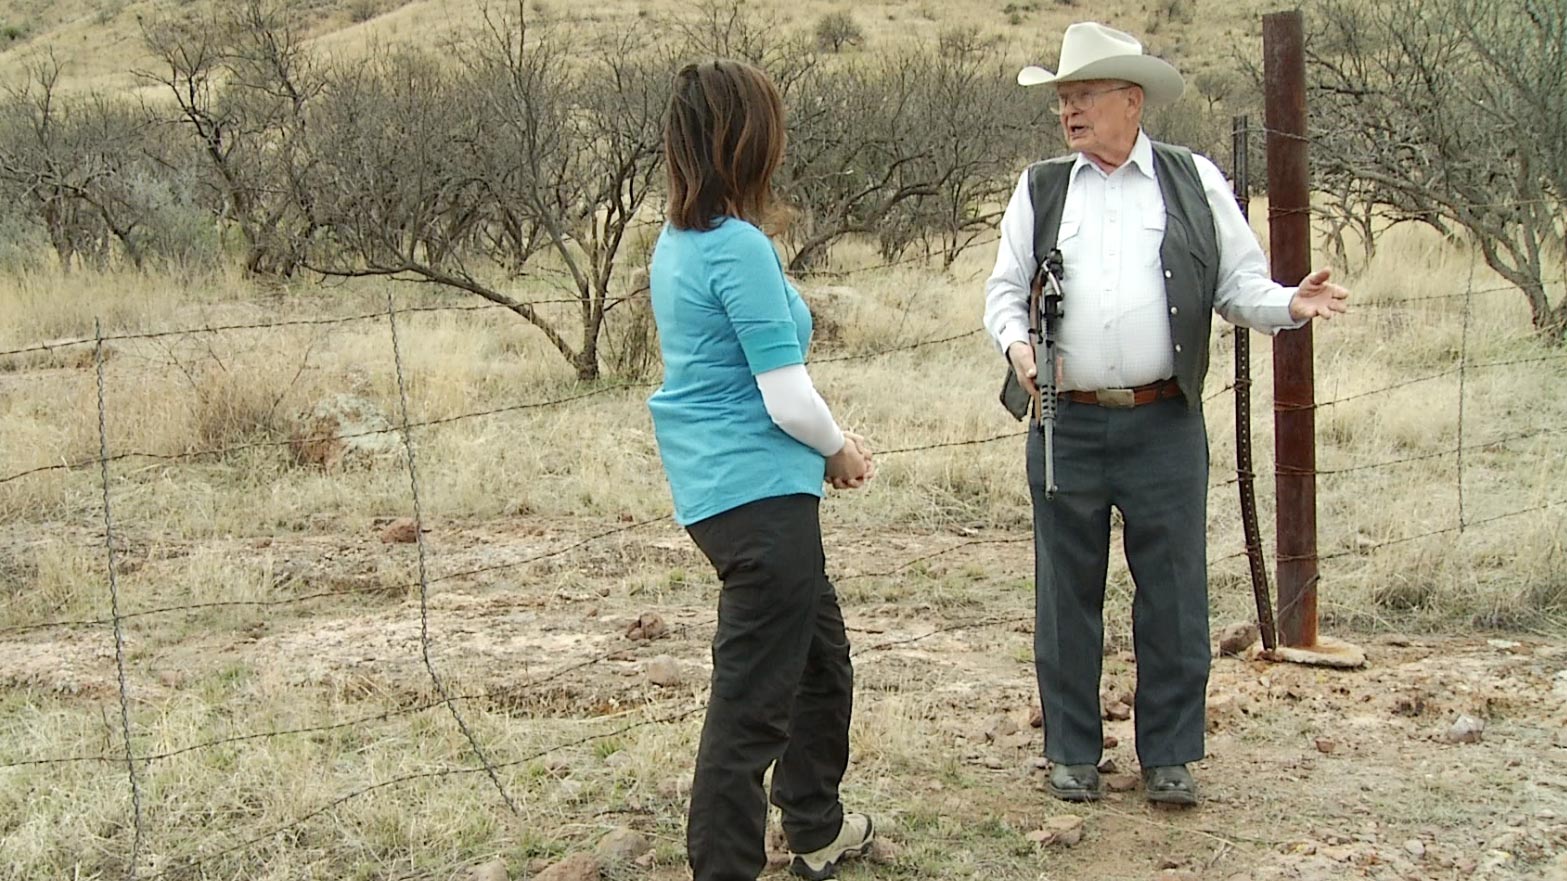 Arivaca rancher Jim Chilton speaks with AZPM's Lorraine Rivera at the international border fence on his ranch.